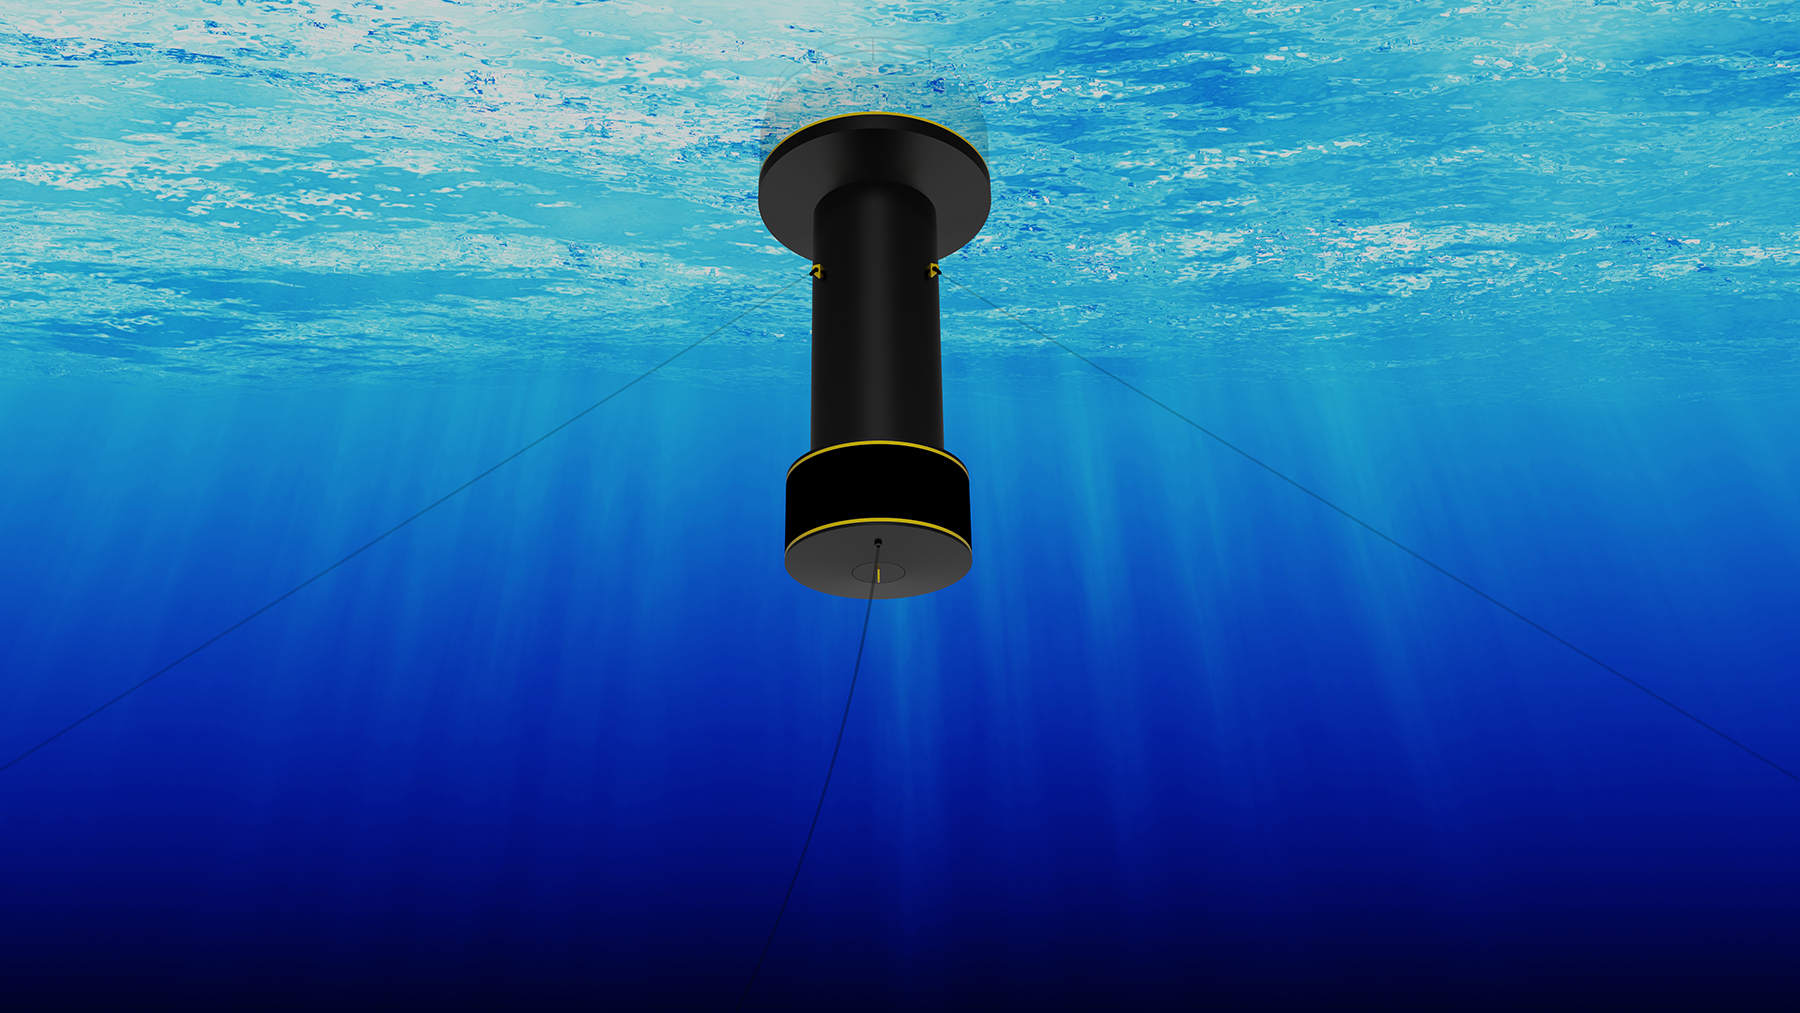 The SeaWell 150 Buoy includes a seawater desalination system that is designed to produce up to 1 mgd of drinking water. (Image courtesy of SeaWell LLC)